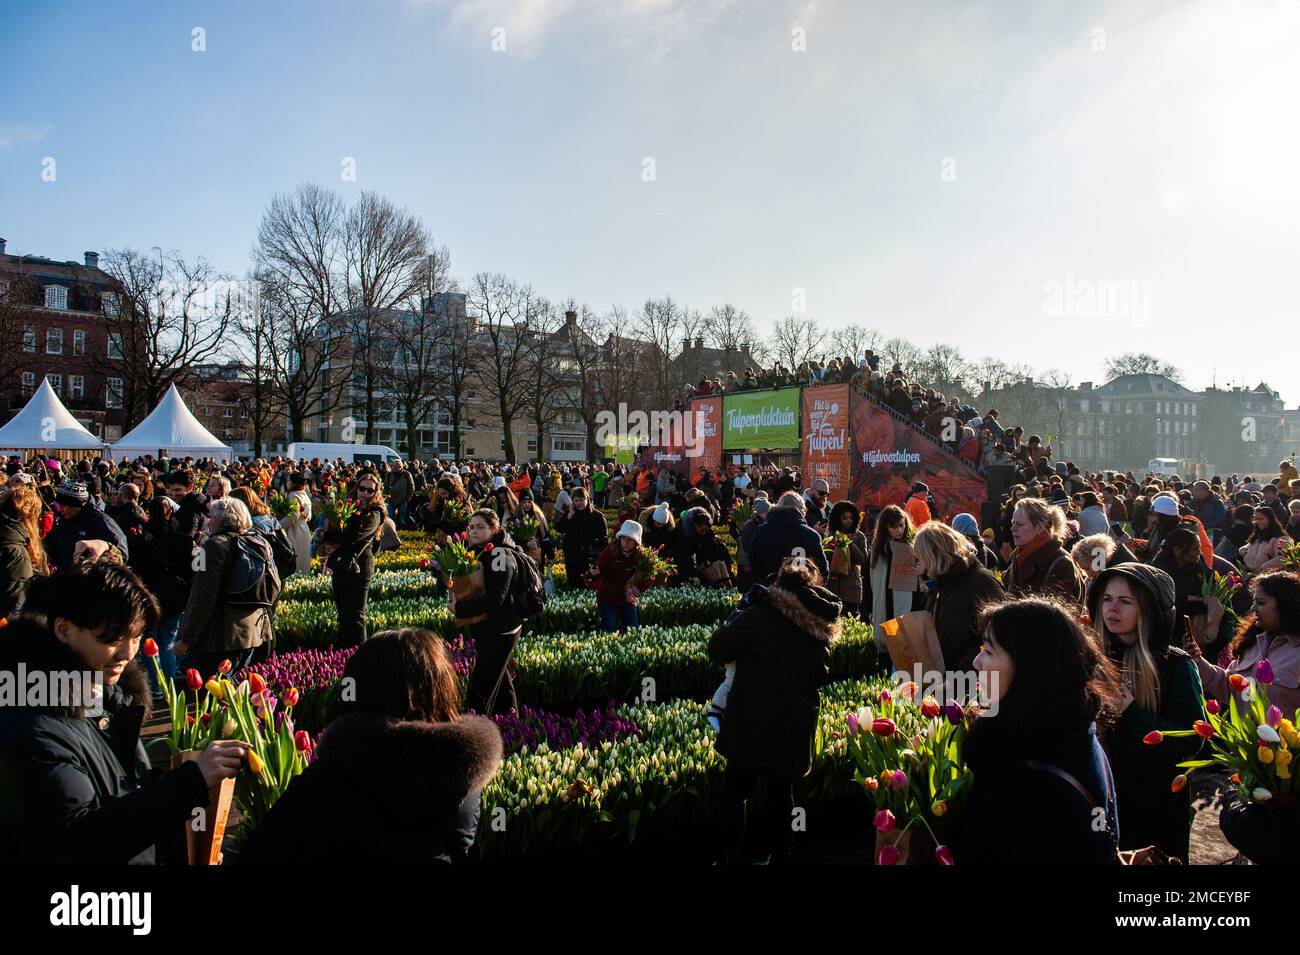 Thousands of people are seen taking tulips for free. Each year on the 3rd Saturday of January, the National Tulip Day is celebrated in Amsterdam. Dutch tulip growers built a huge picking garden with more than 200,000 colorful tulips at the Museumplein in Amsterdam. Visitors are allowed to pick tulips for free. The event was opened by Olympic skating champion, Irene Schouten. Prior to the opening, she christened a new tulip: Tulipa 'Dutch Pearl' as a reference to the world - famous painting 'The girl with a pearl earring' by Johannes Vermeer. (Photo by Ana Fernandez/SOPA Images/Sipa USA) Stock Photo